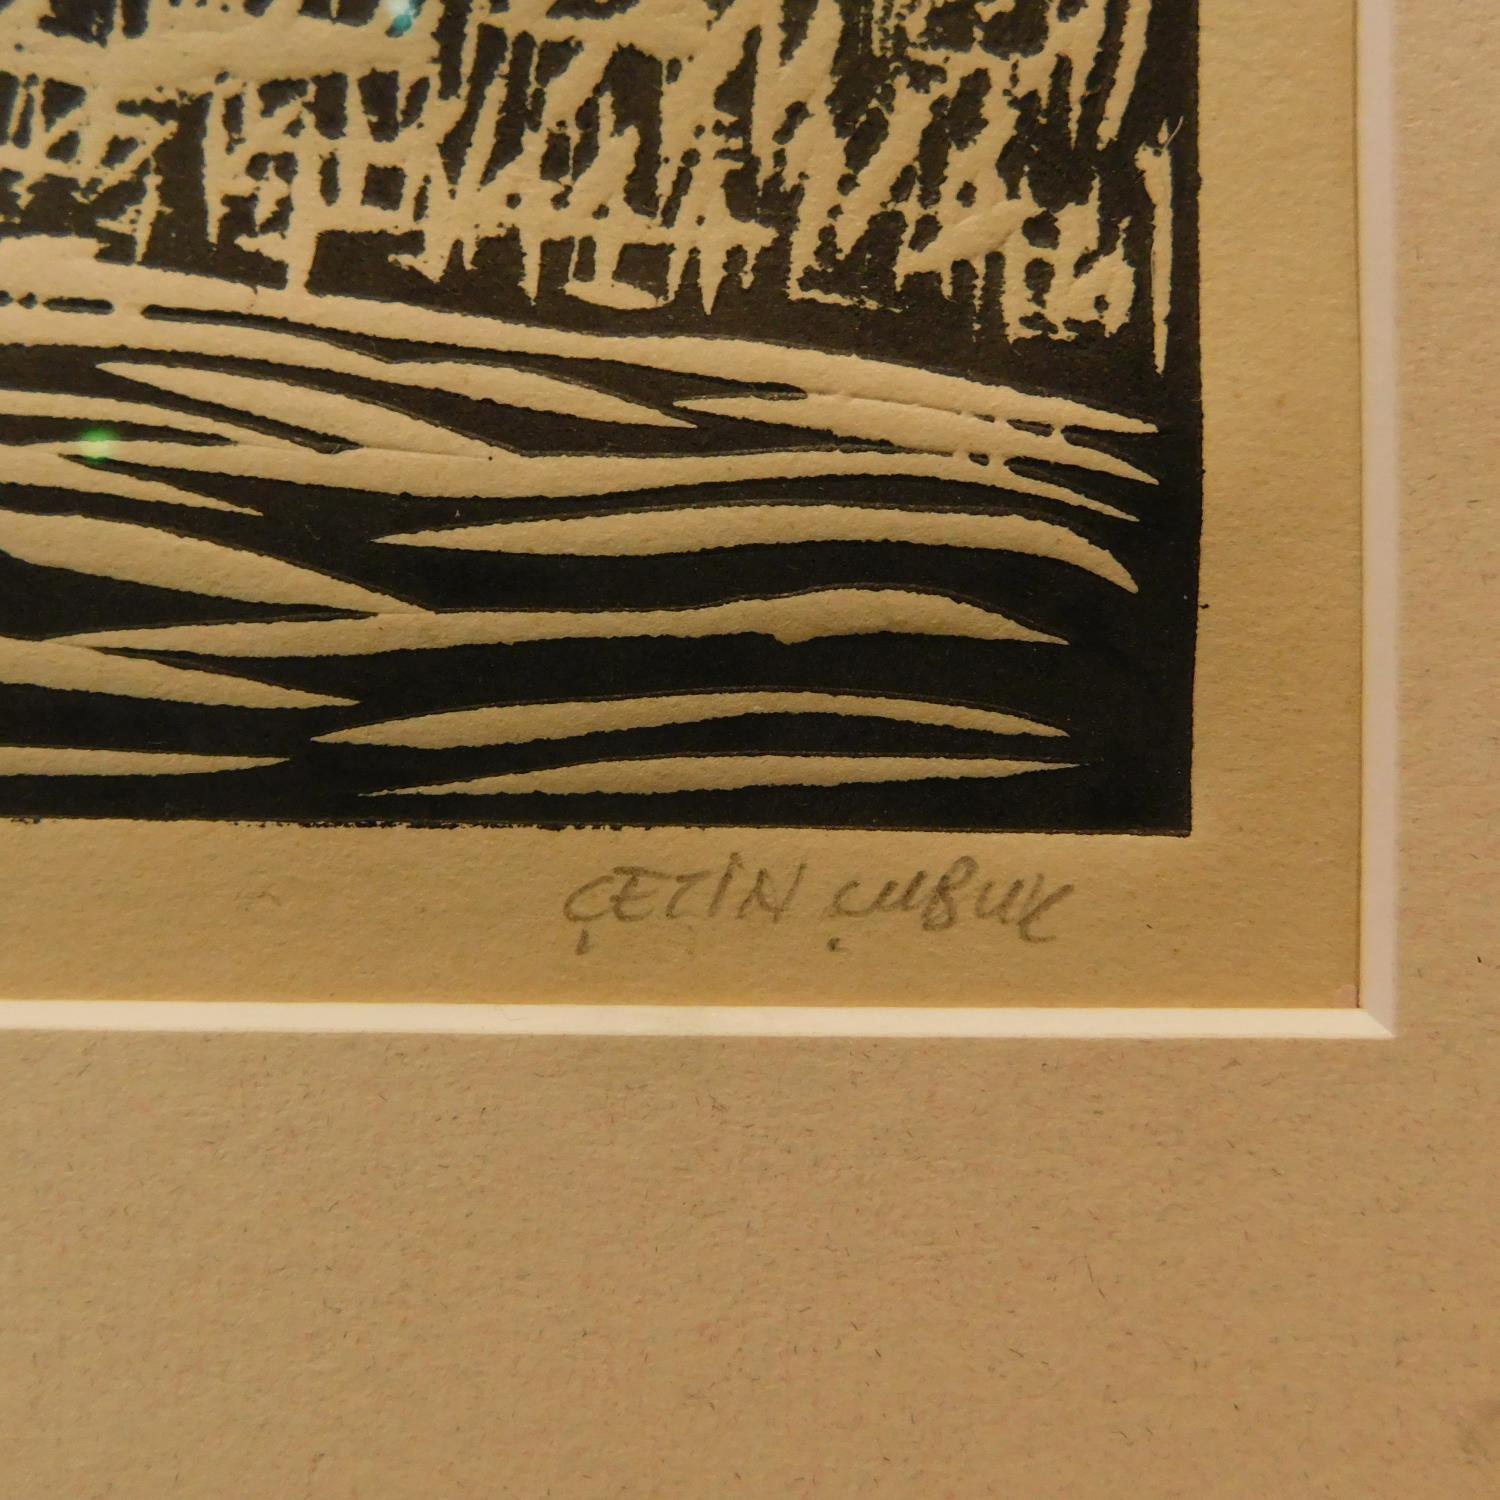 Cetin Cubuk, A Horse, woodblock print, signed in pencil to lower right, numbered 4/4, framed and - Image 4 of 4